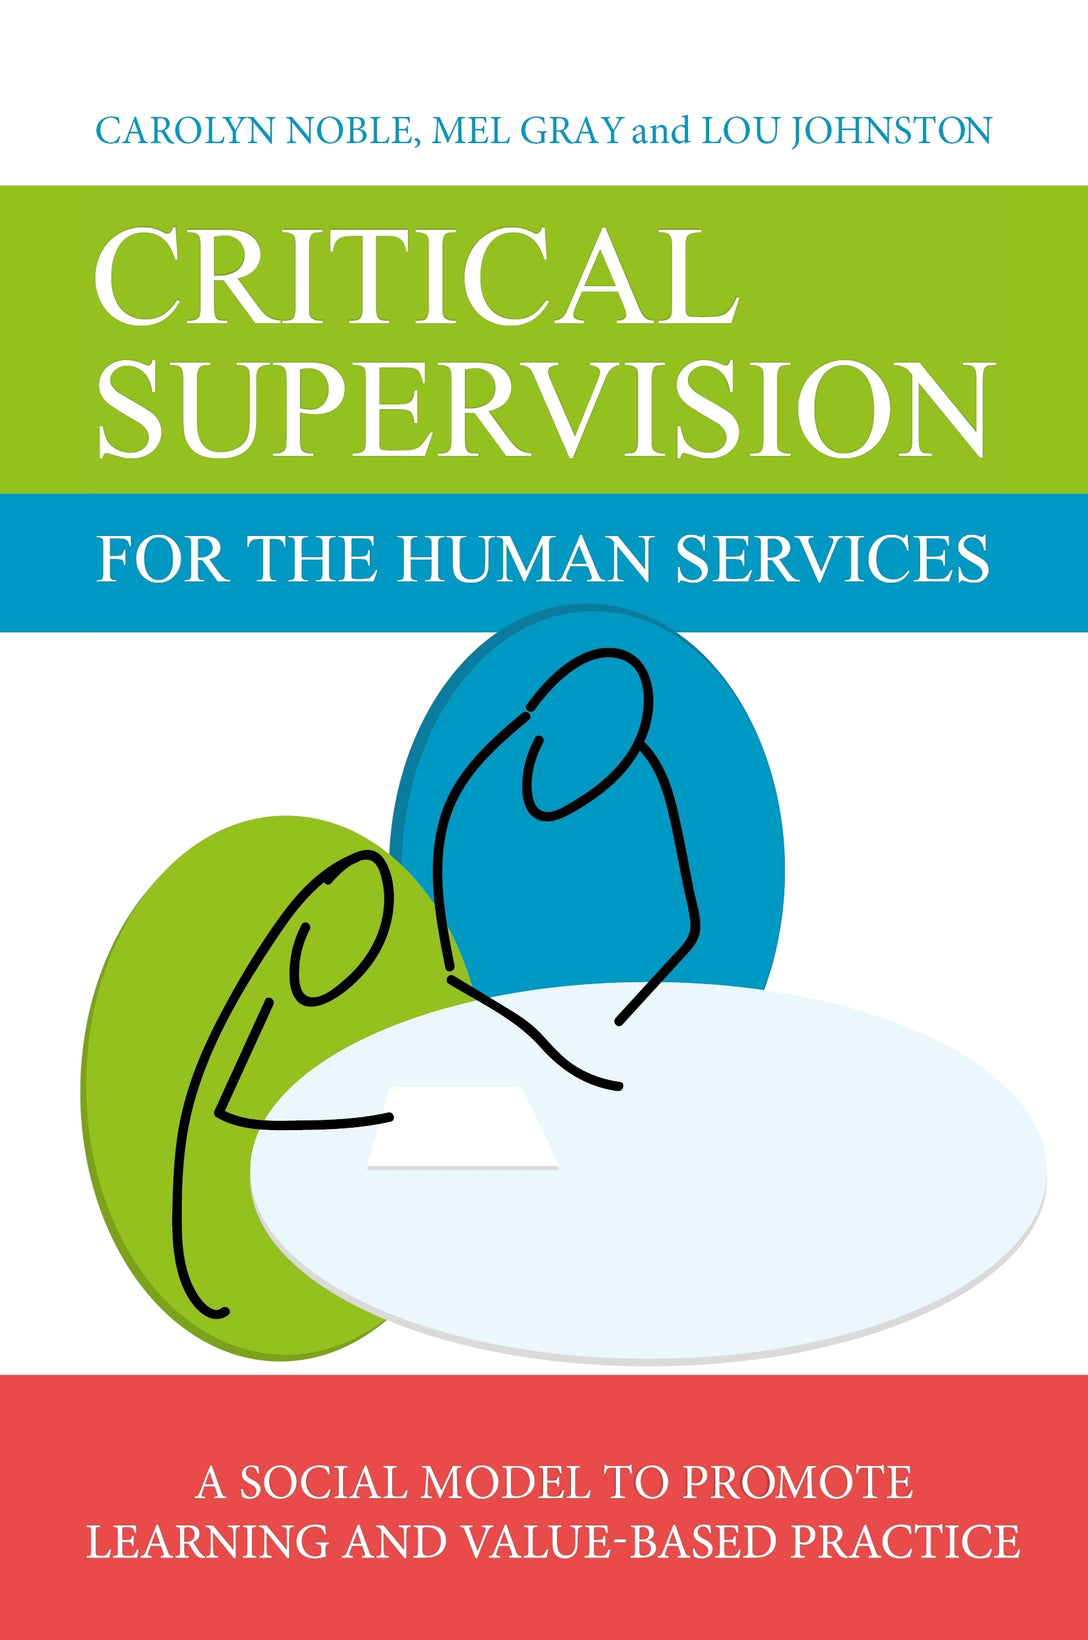 Critical Supervision for the Human Services by Mel Gray, Lou Johnston, Carolyn Noble